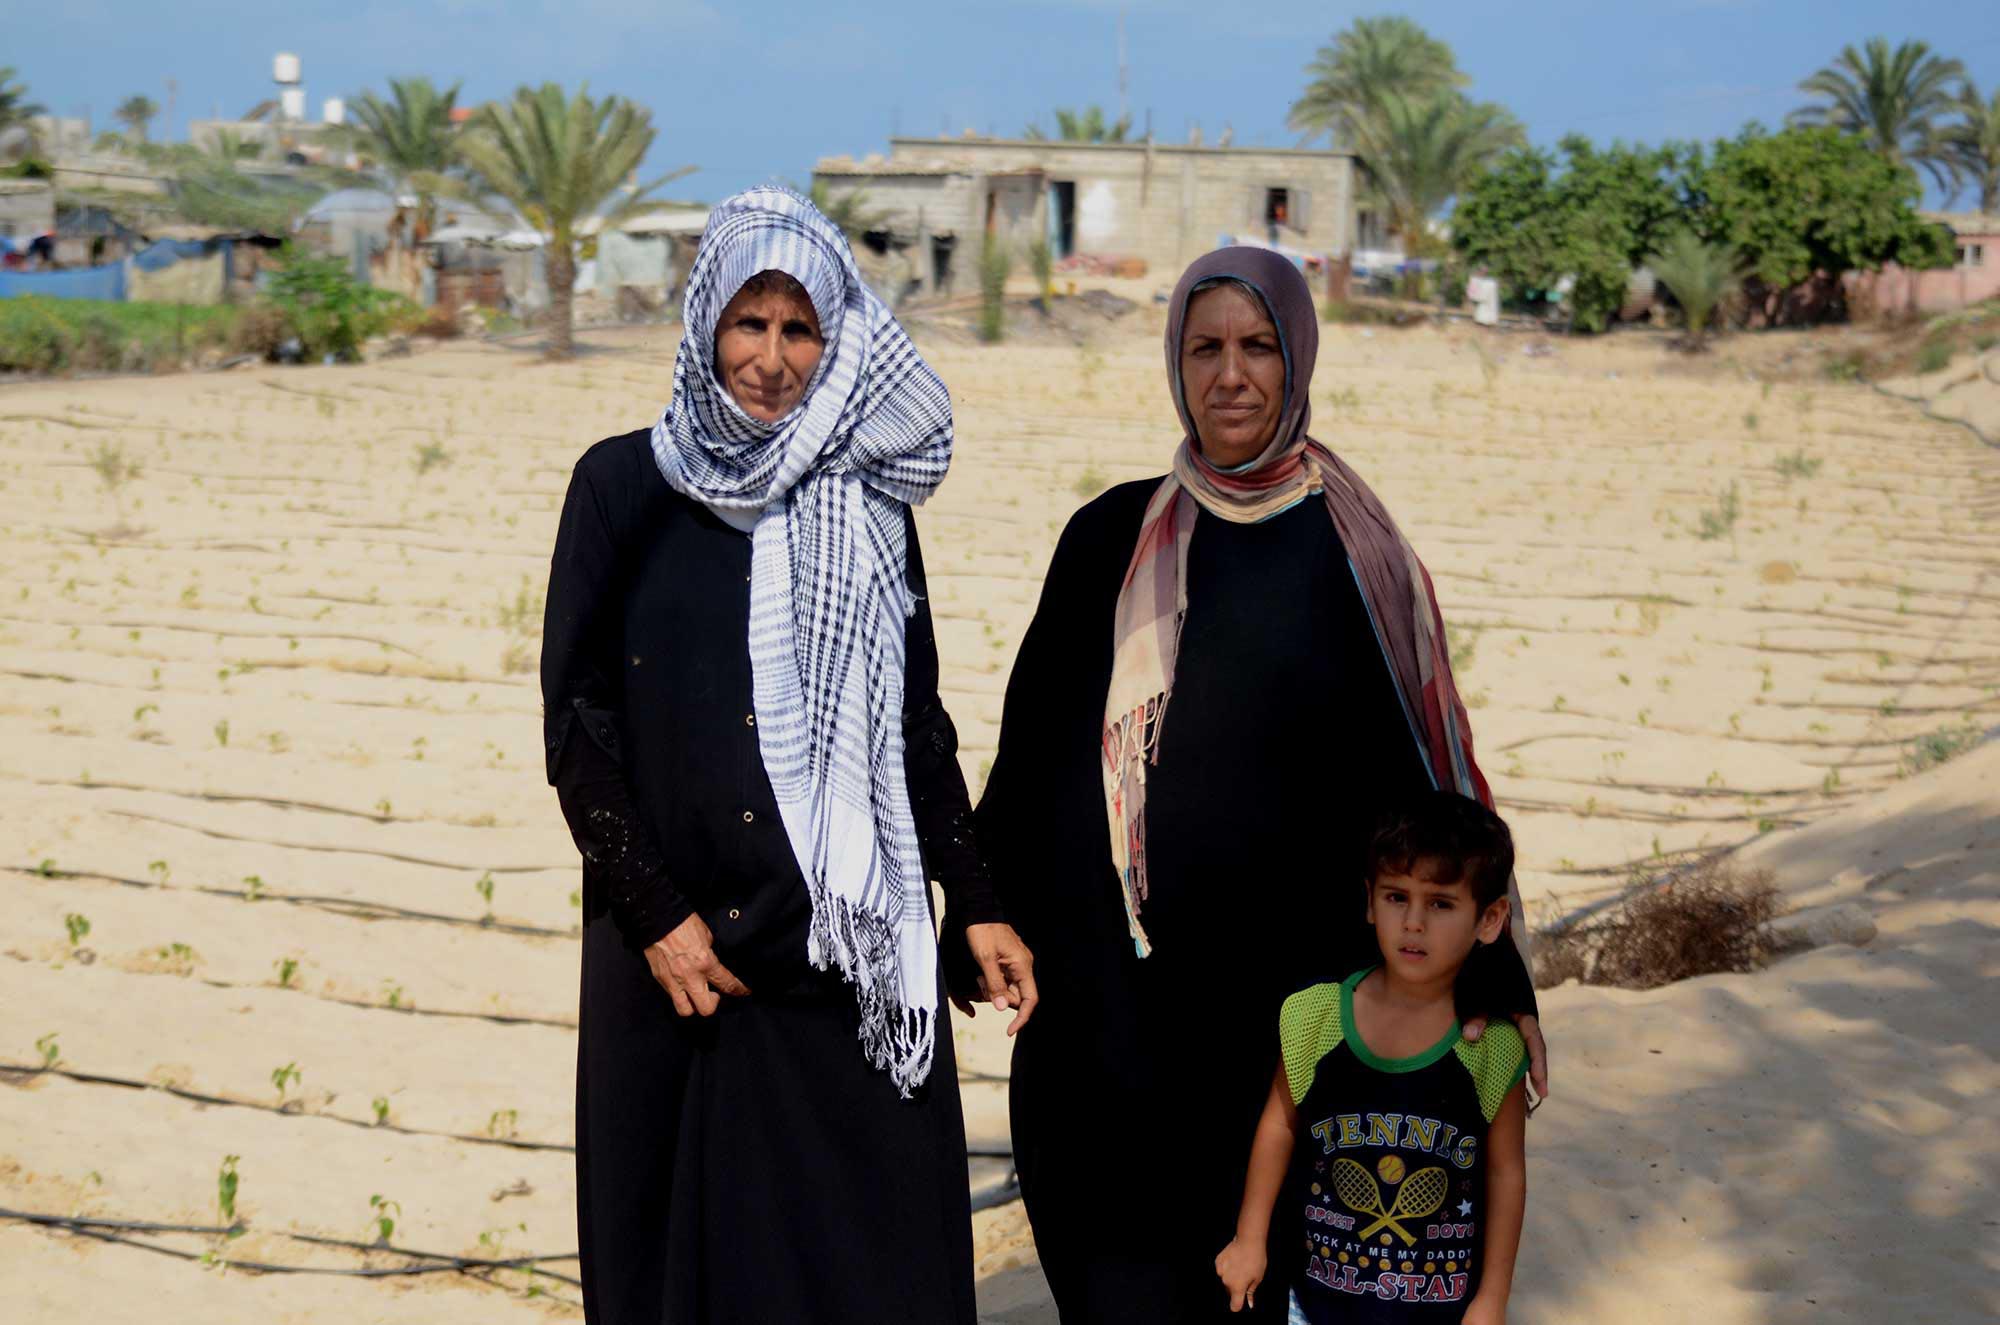 Fatima, Najat and Najat’s son stand in front of their field. Their home is in the background.